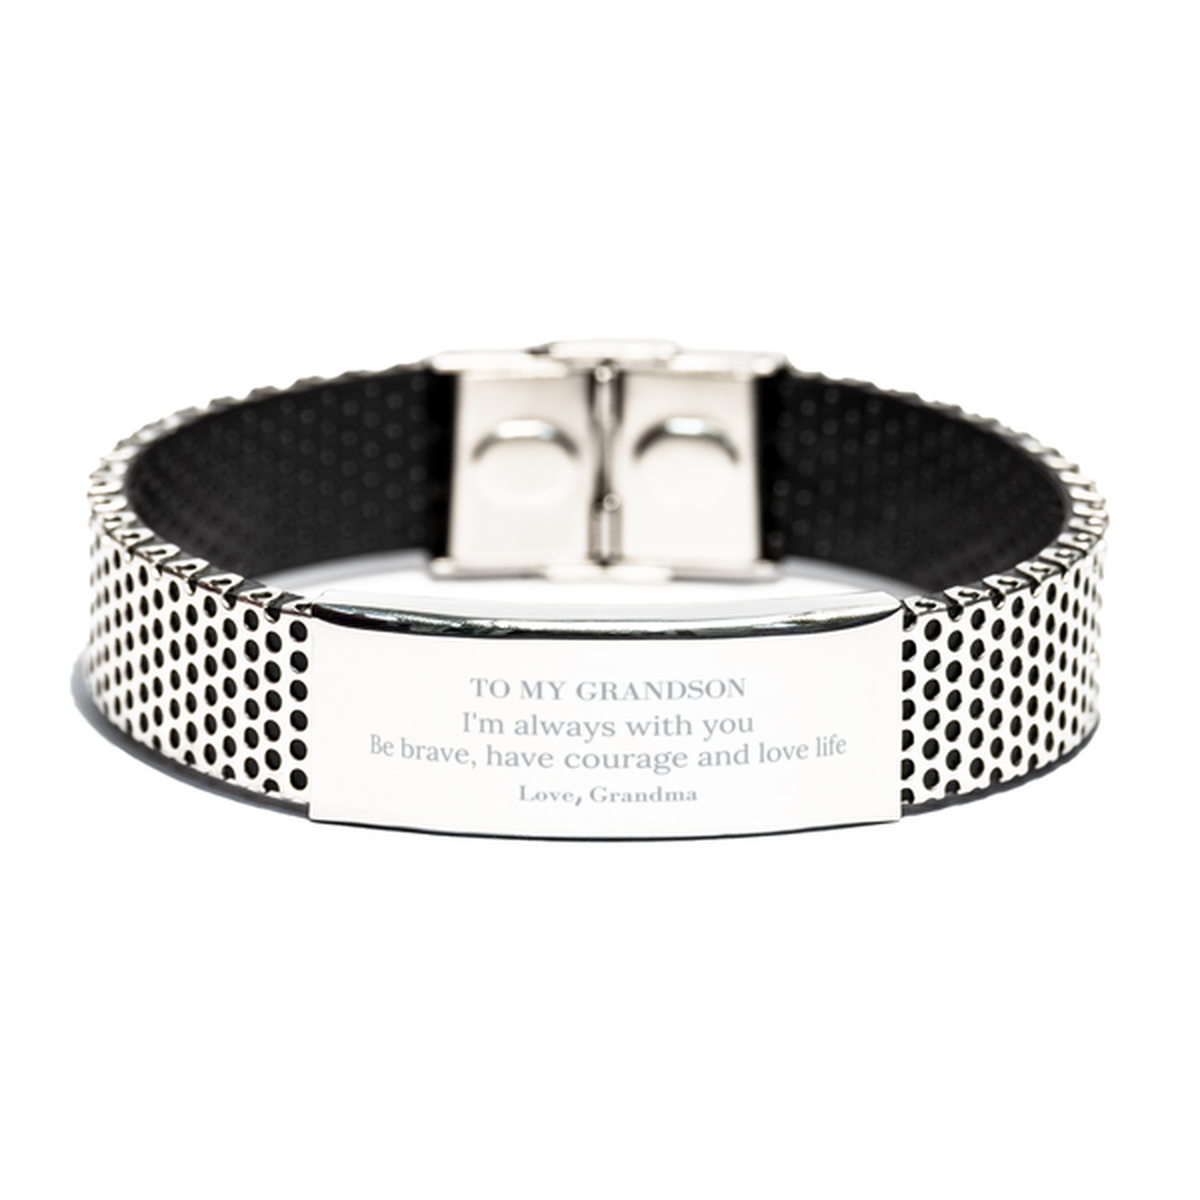 To My Grandson Gifts from Grandma, Unique Stainless Steel Bracelet Inspirational Christmas Birthday Graduation Gifts for Grandson I'm always with you. Be brave, have courage and love life. Love, Grandma